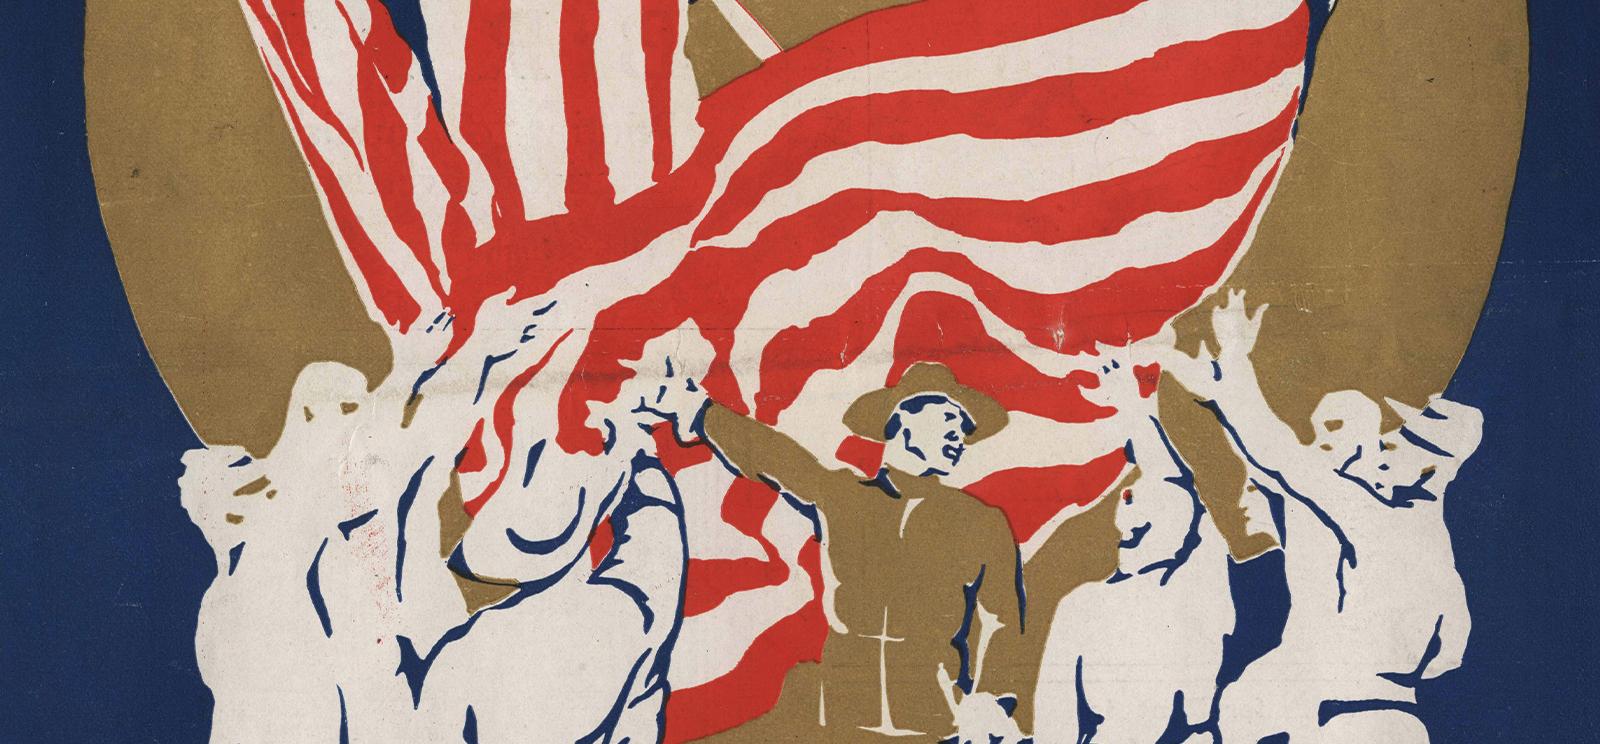 Poster print of a soldier singing or cheering while a group of soldiers surrounding him also sing or cheer. Two very large U.S. flags wave in the background.